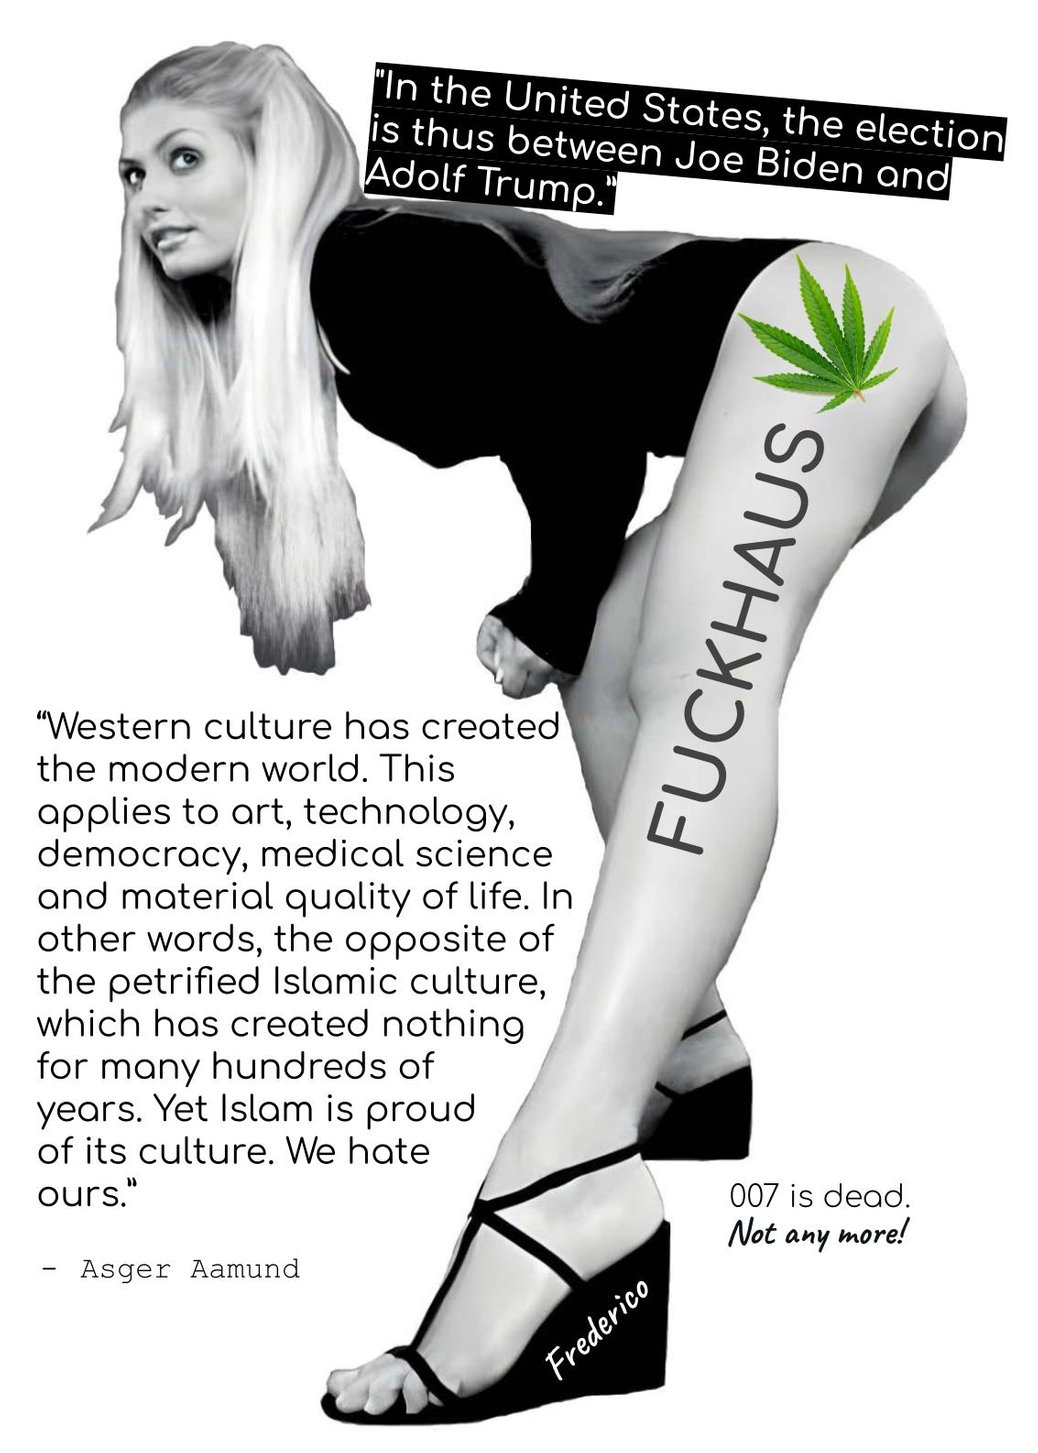 "Western culture" by Asger Aamund